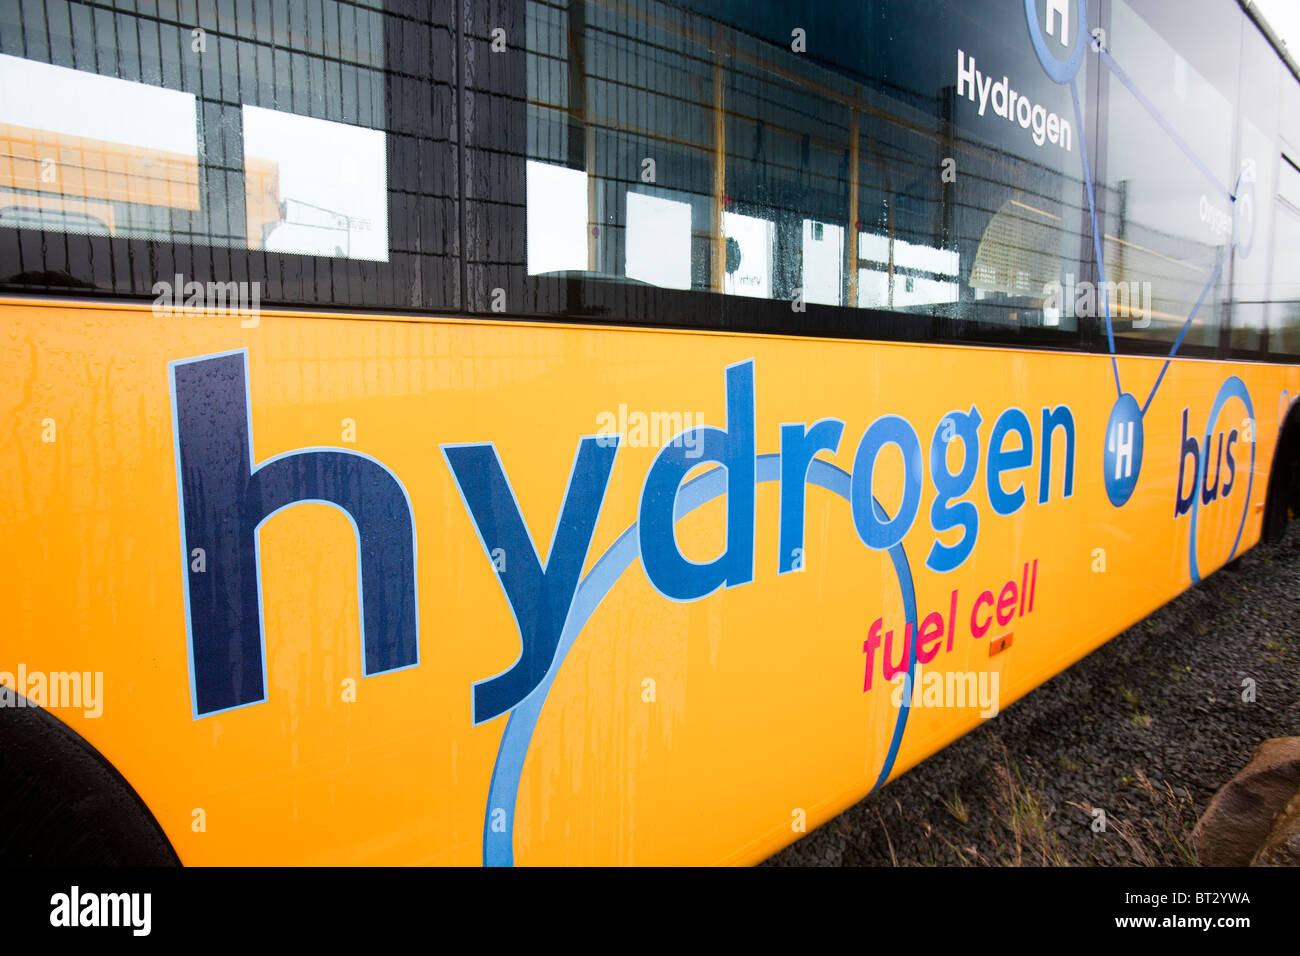 A hydrogen bus in Reykavik, Iceland. The bus was part of a project to help Iceland move away from imported oil Stock Photo